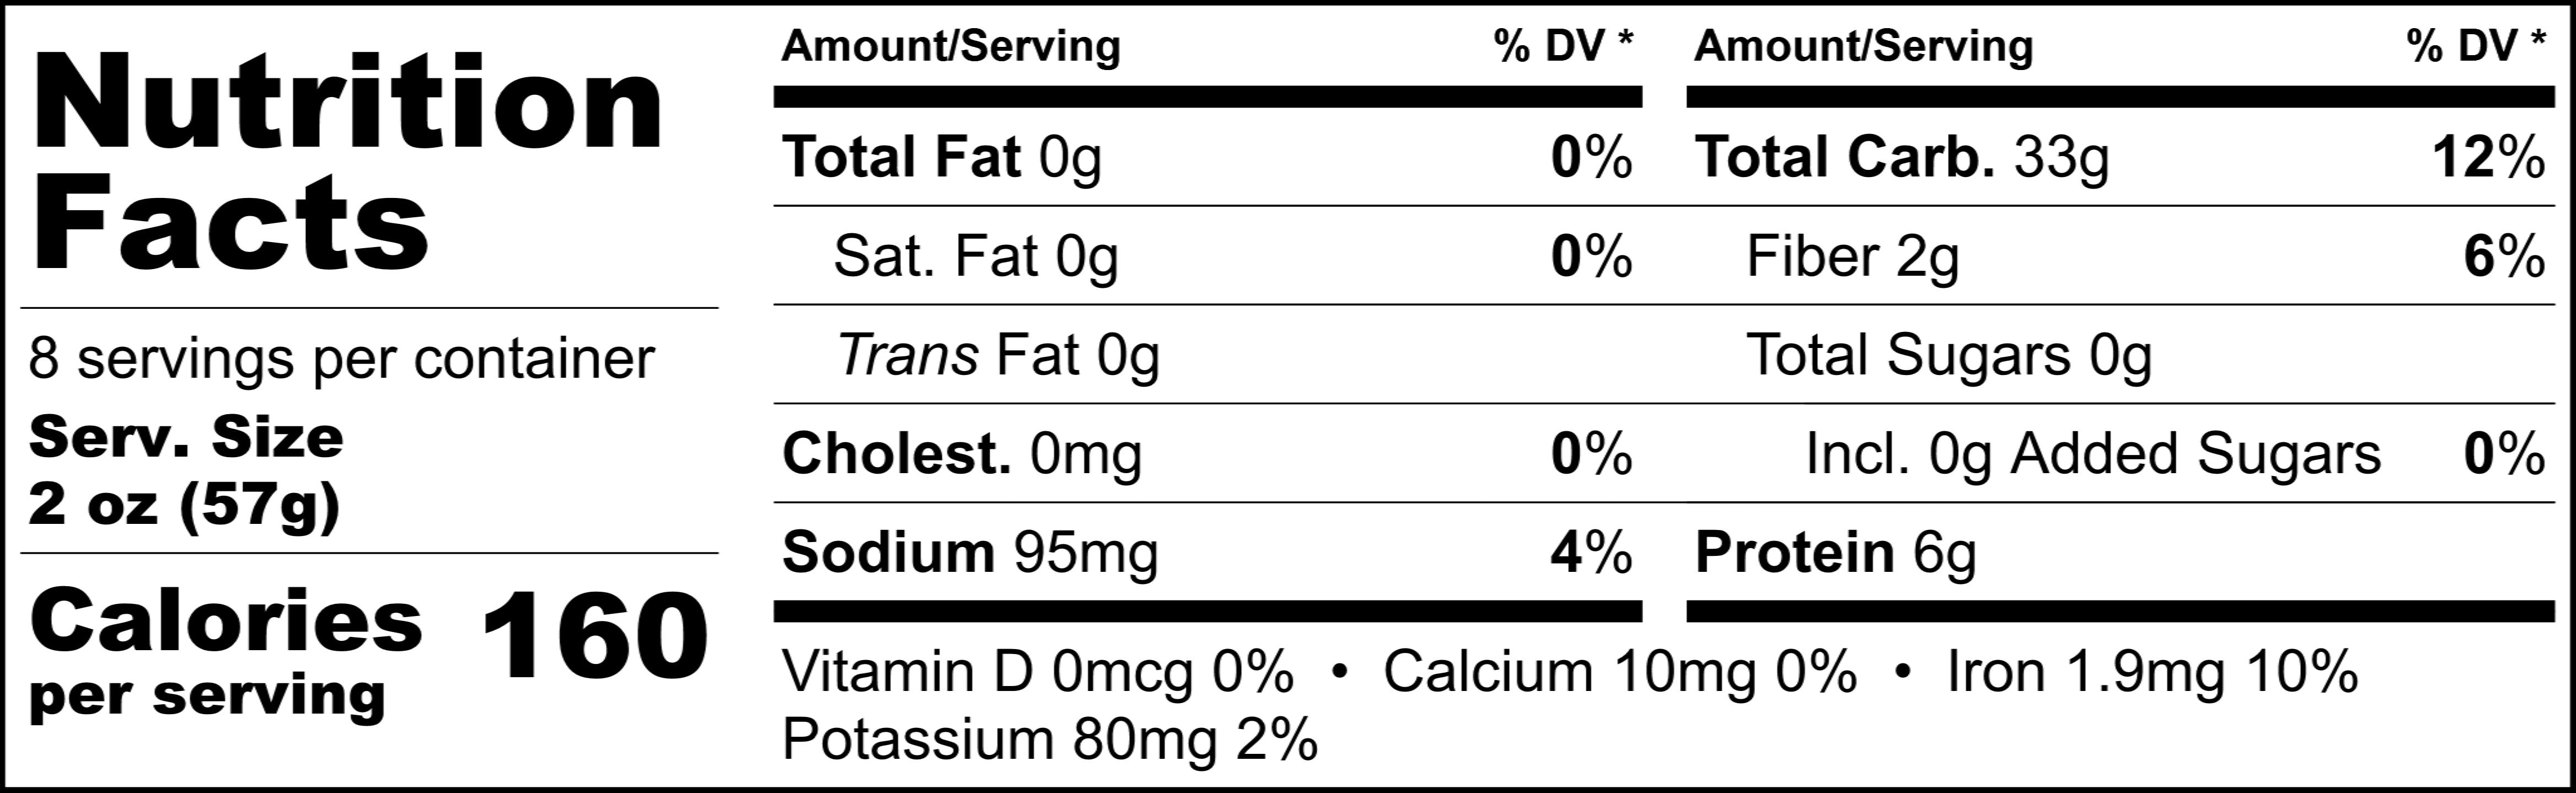 Pappardelle's Roasted Garlic Fettuccine Nutritional Statement 